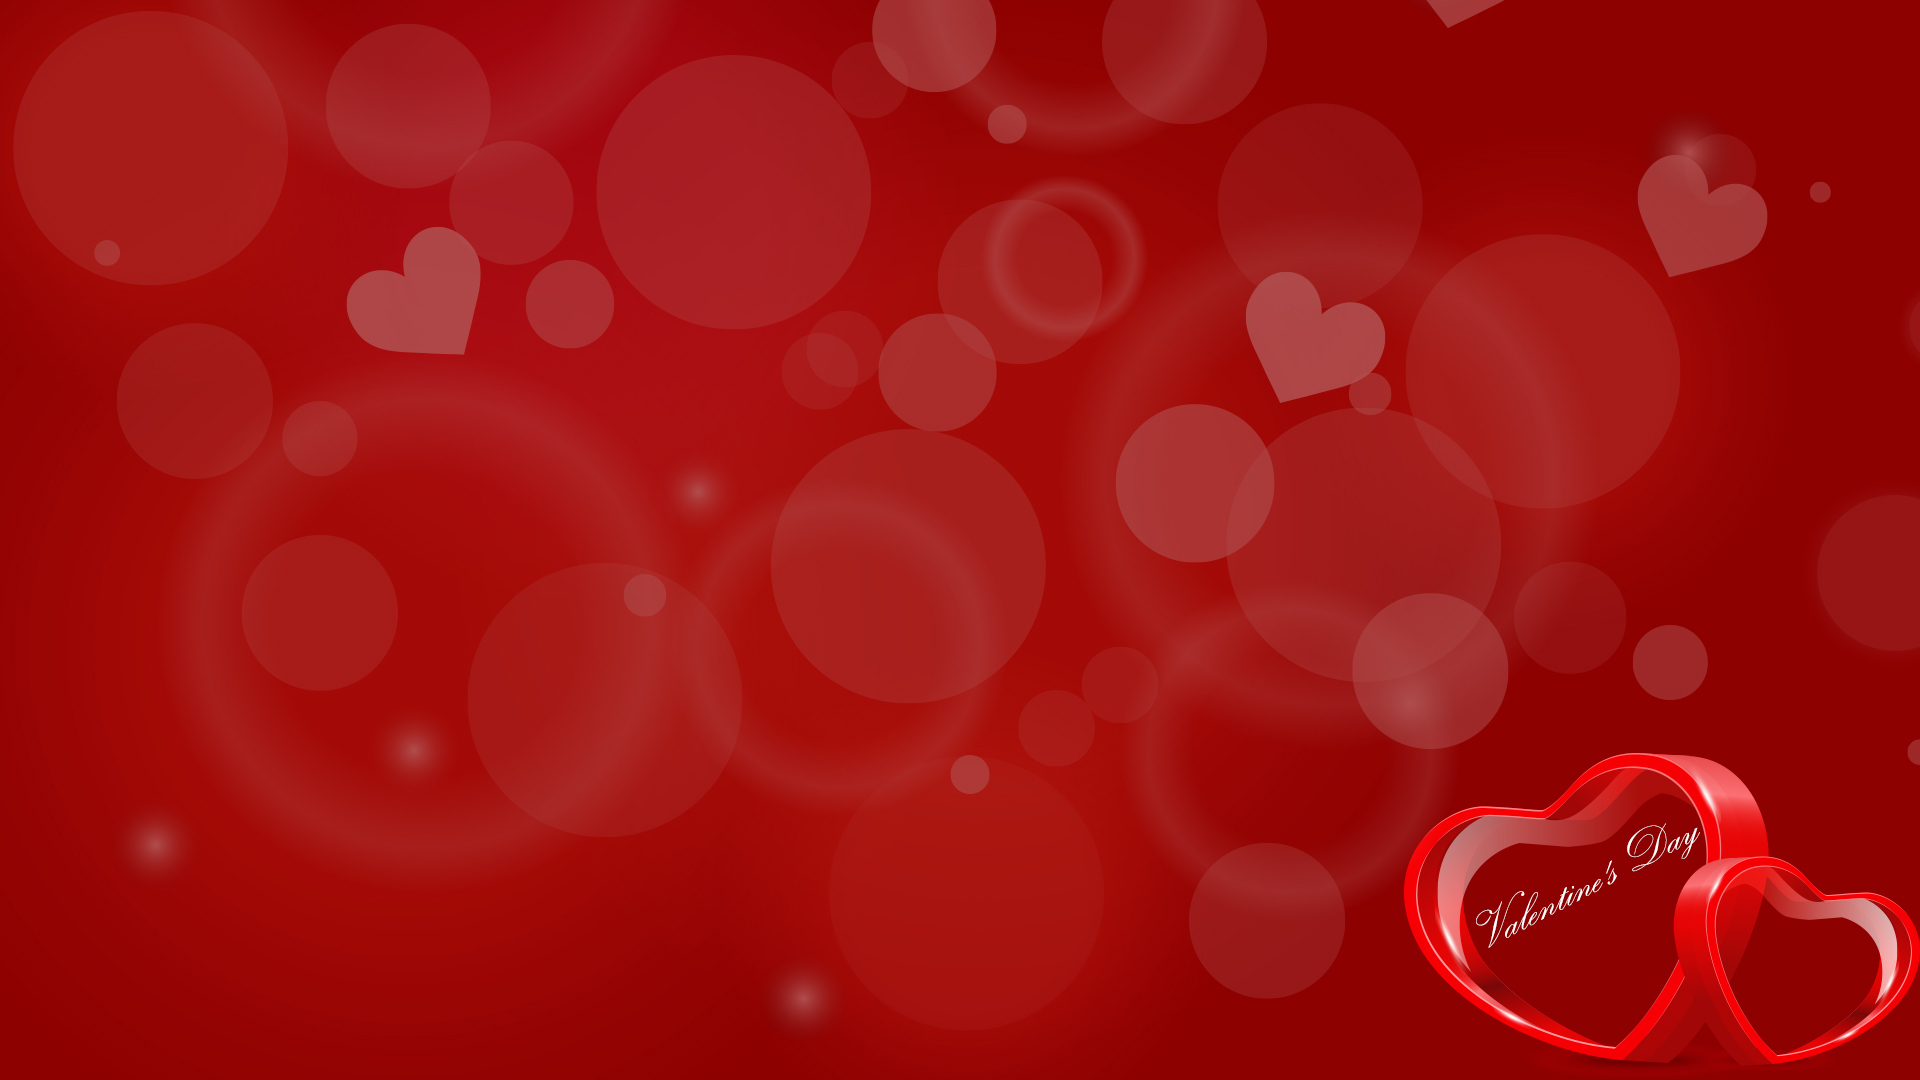 Valentines Day Heart Backgrounds For Powerpoint – Love Ppt Within Valentine Powerpoint Templates Free